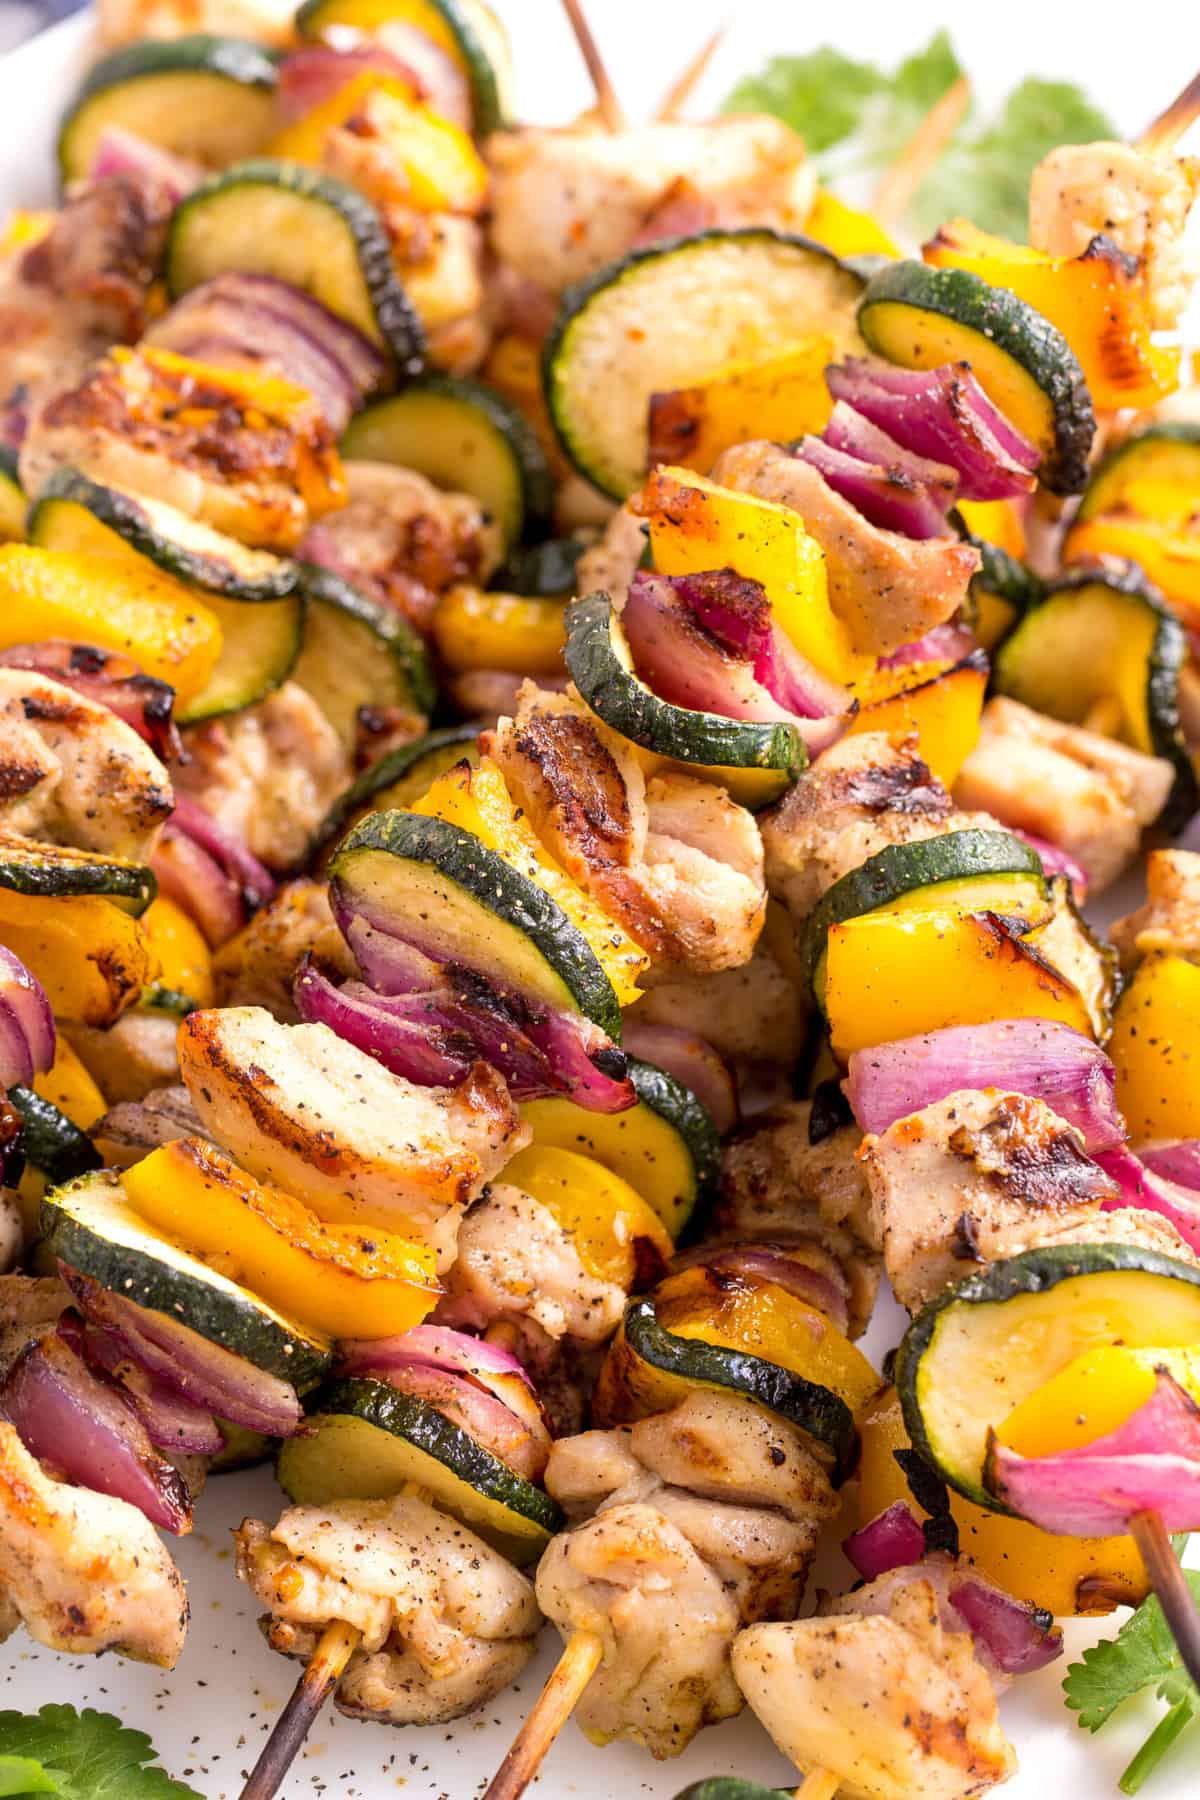 close up image of a pile of grilled chicken and vegetable kabobs served on a white oval plate